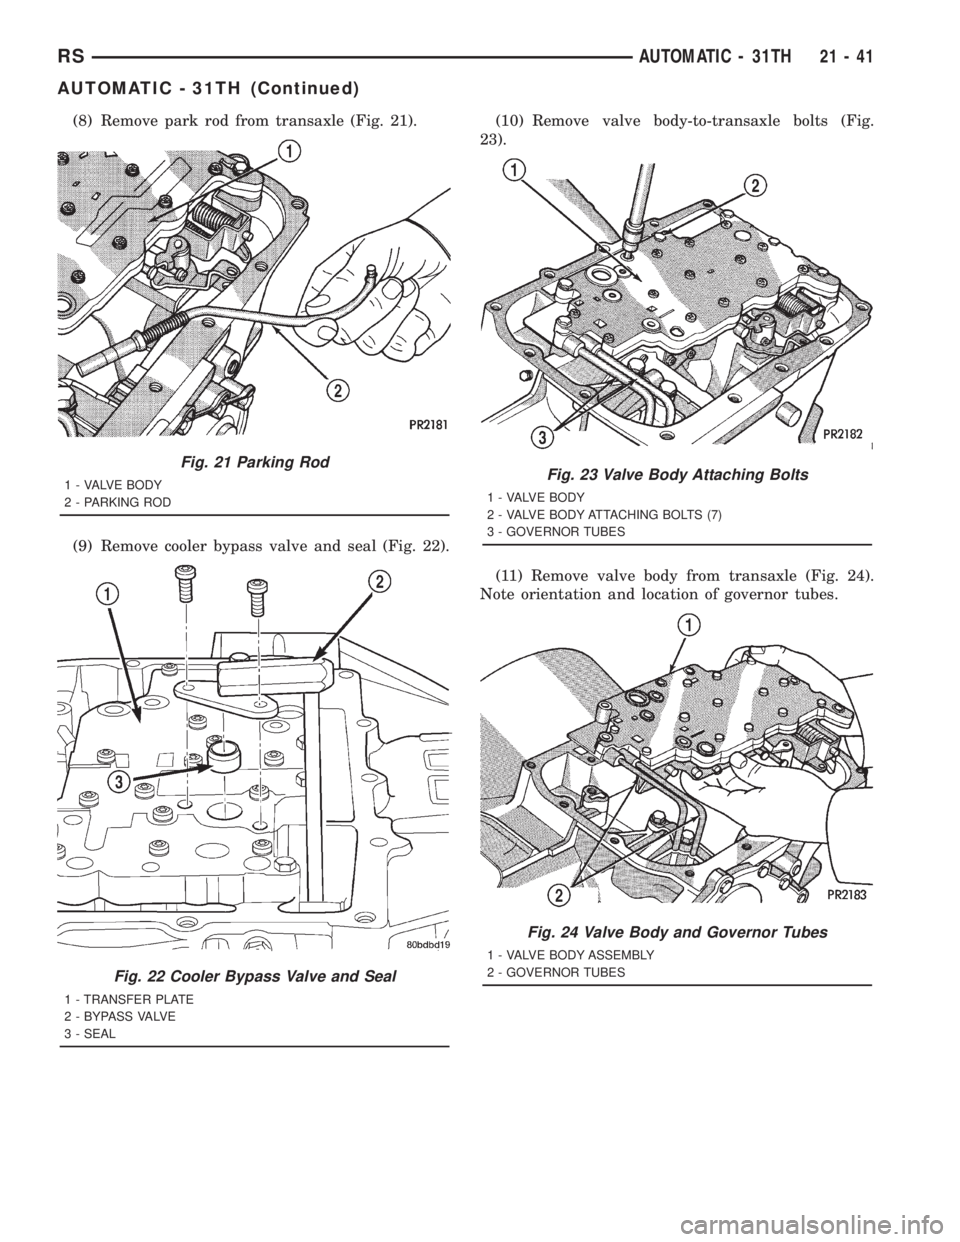 CHRYSLER VOYAGER 2001  Service Manual (8) Remove park rod from transaxle (Fig. 21).
(9) Remove cooler bypass valve and seal (Fig. 22).(10) Remove valve body-to-transaxle bolts (Fig.
23).
(11) Remove valve body from transaxle (Fig. 24).
No